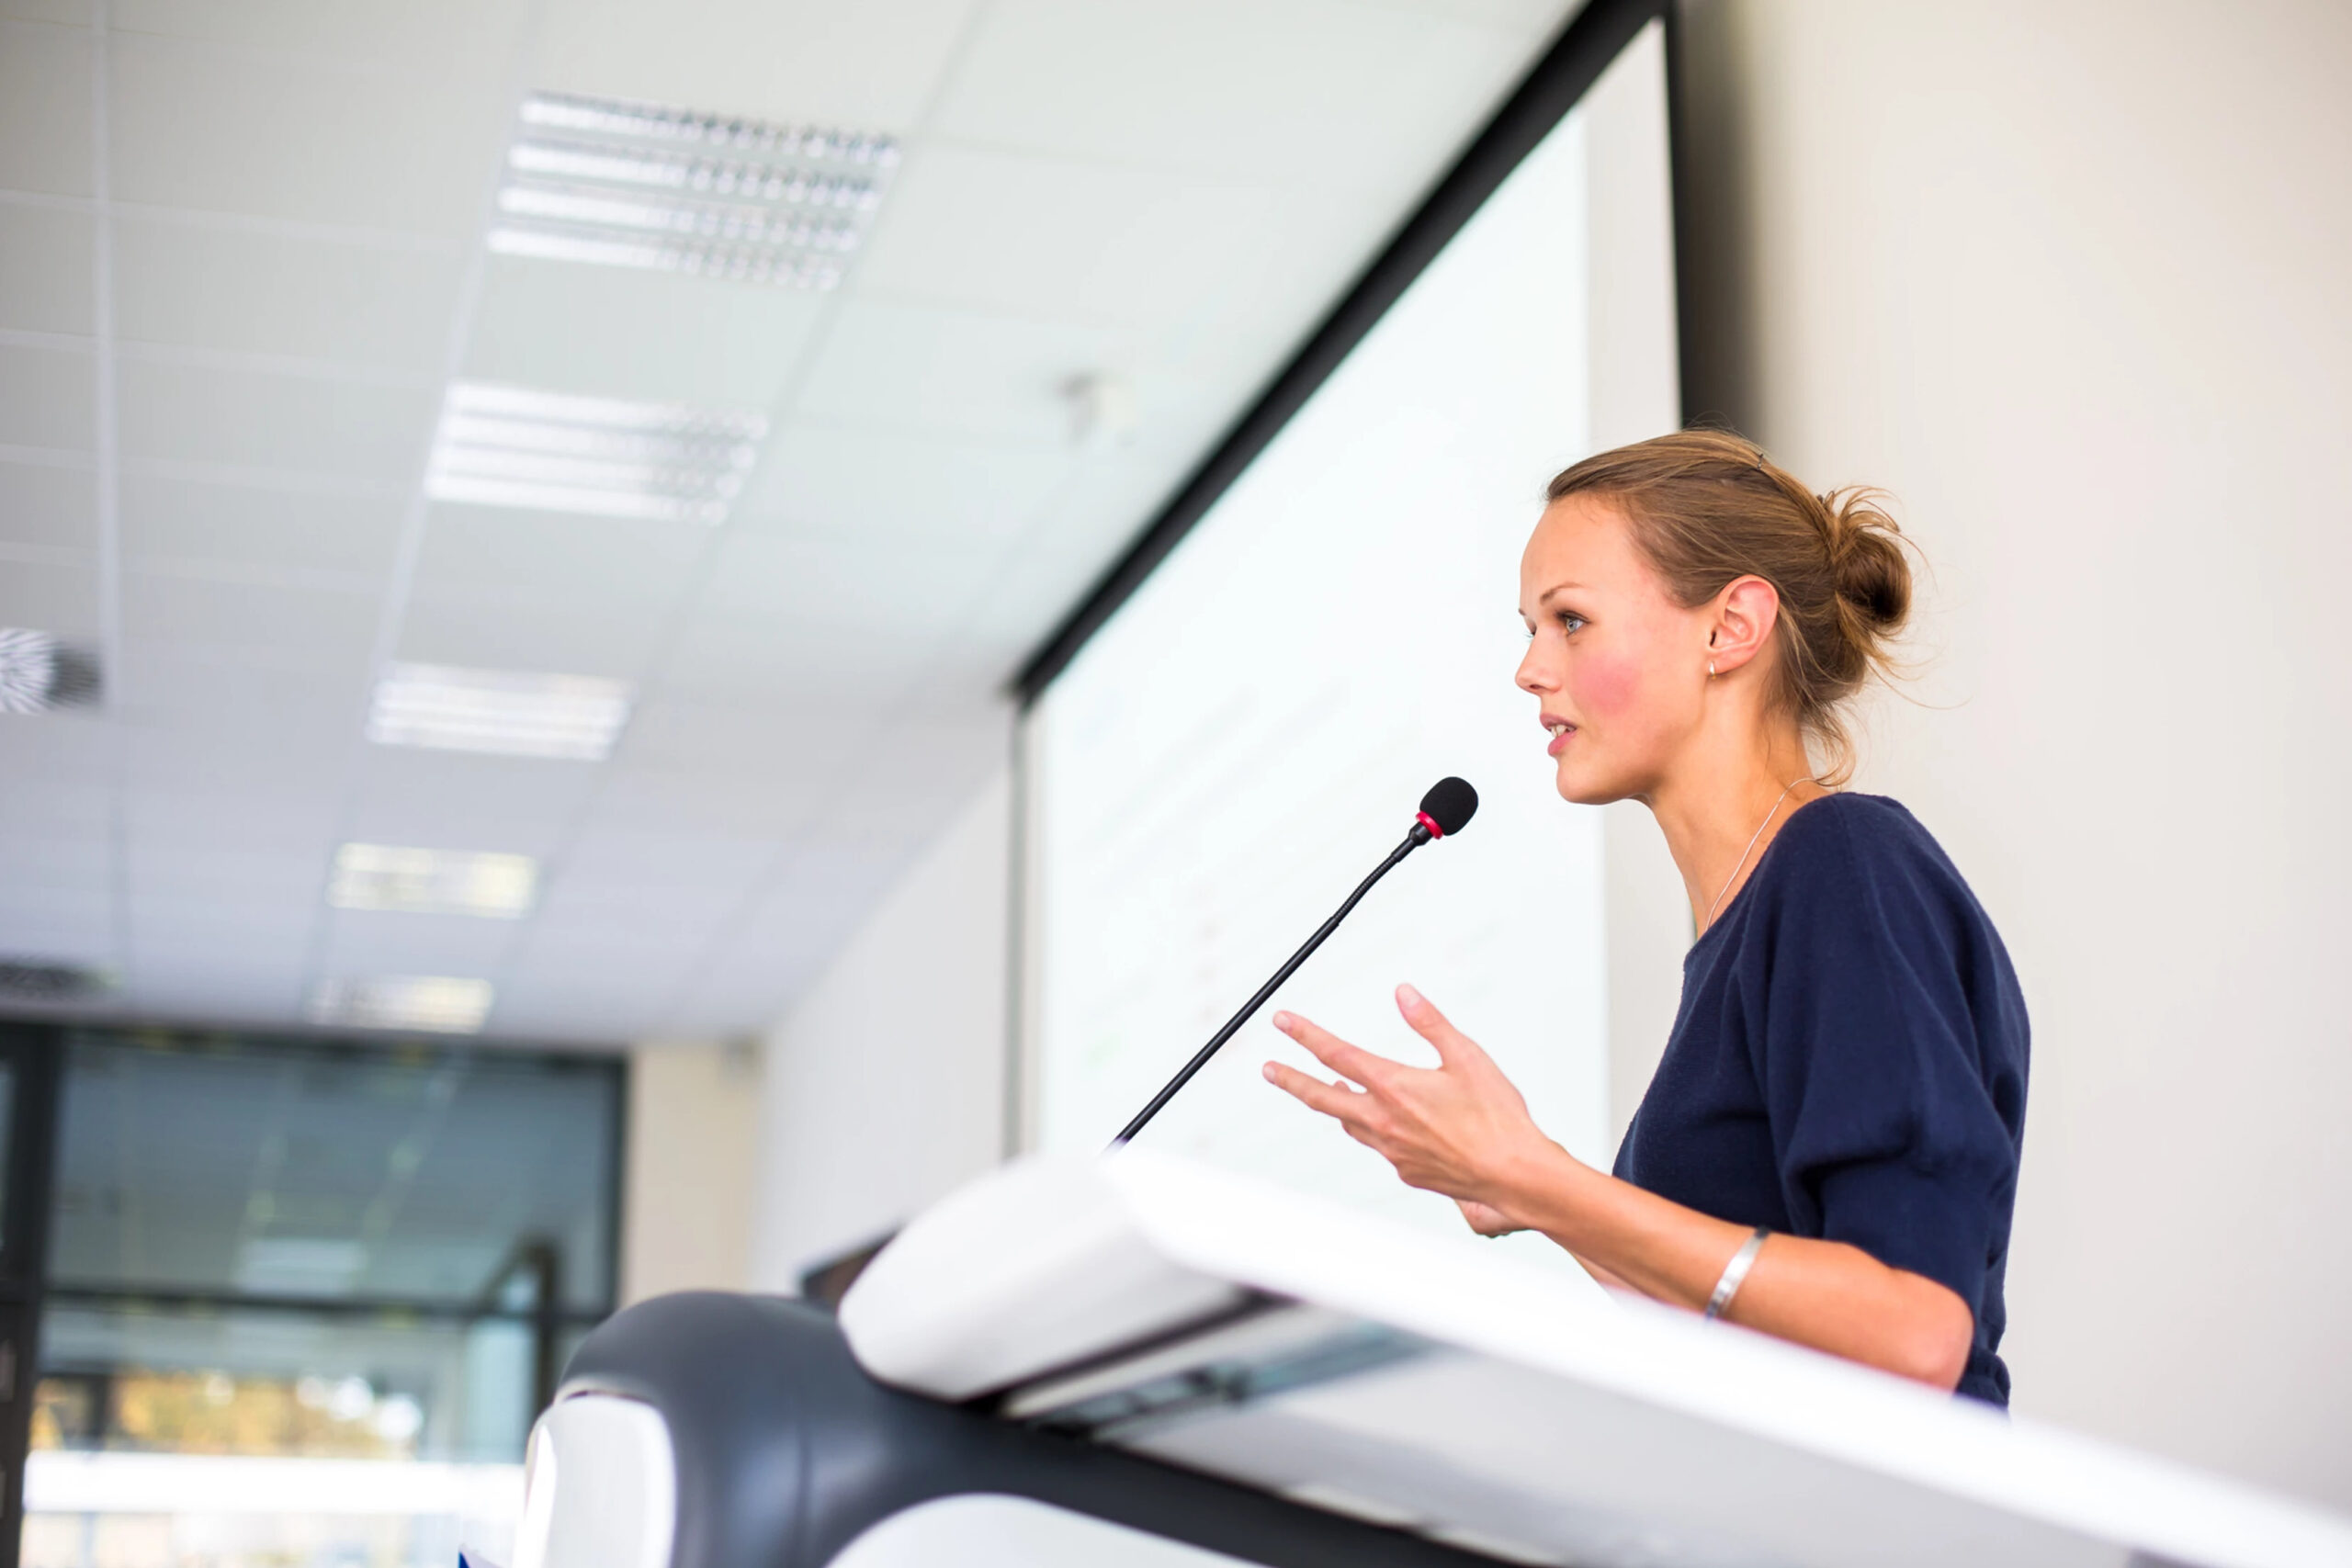 Speaking engagements are a great way to build credibility and awareness of your practice within your community.